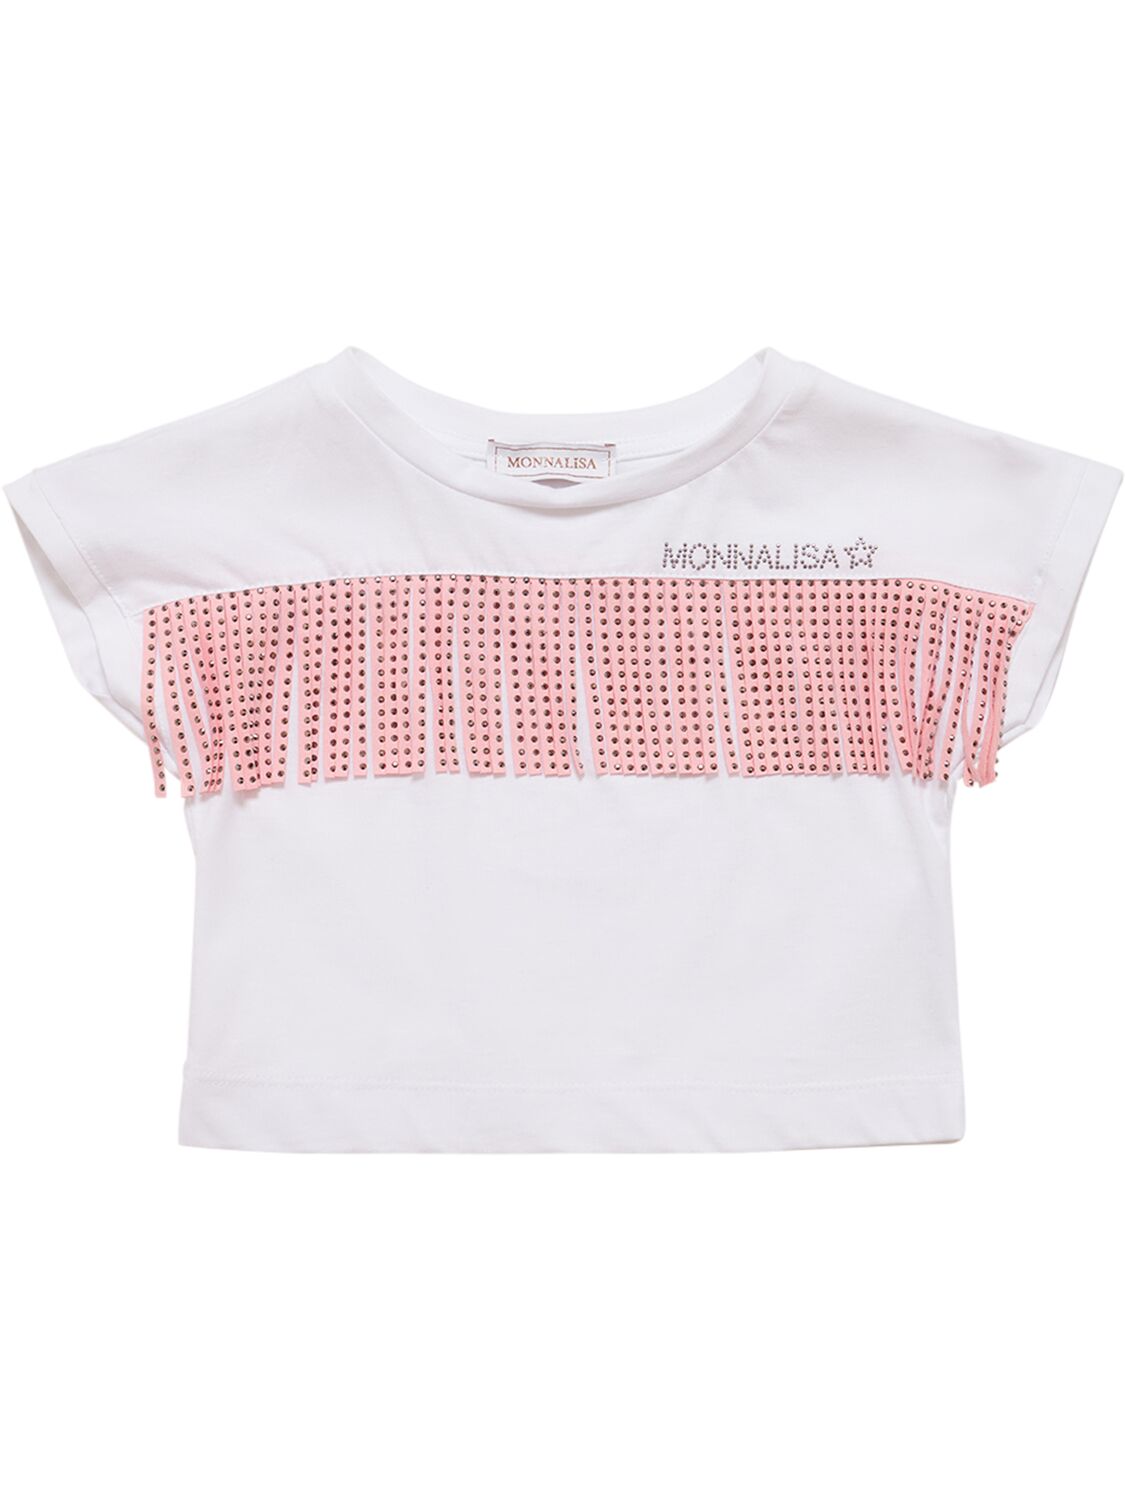 Image of Cotton Jersey T-shirt W/fringes